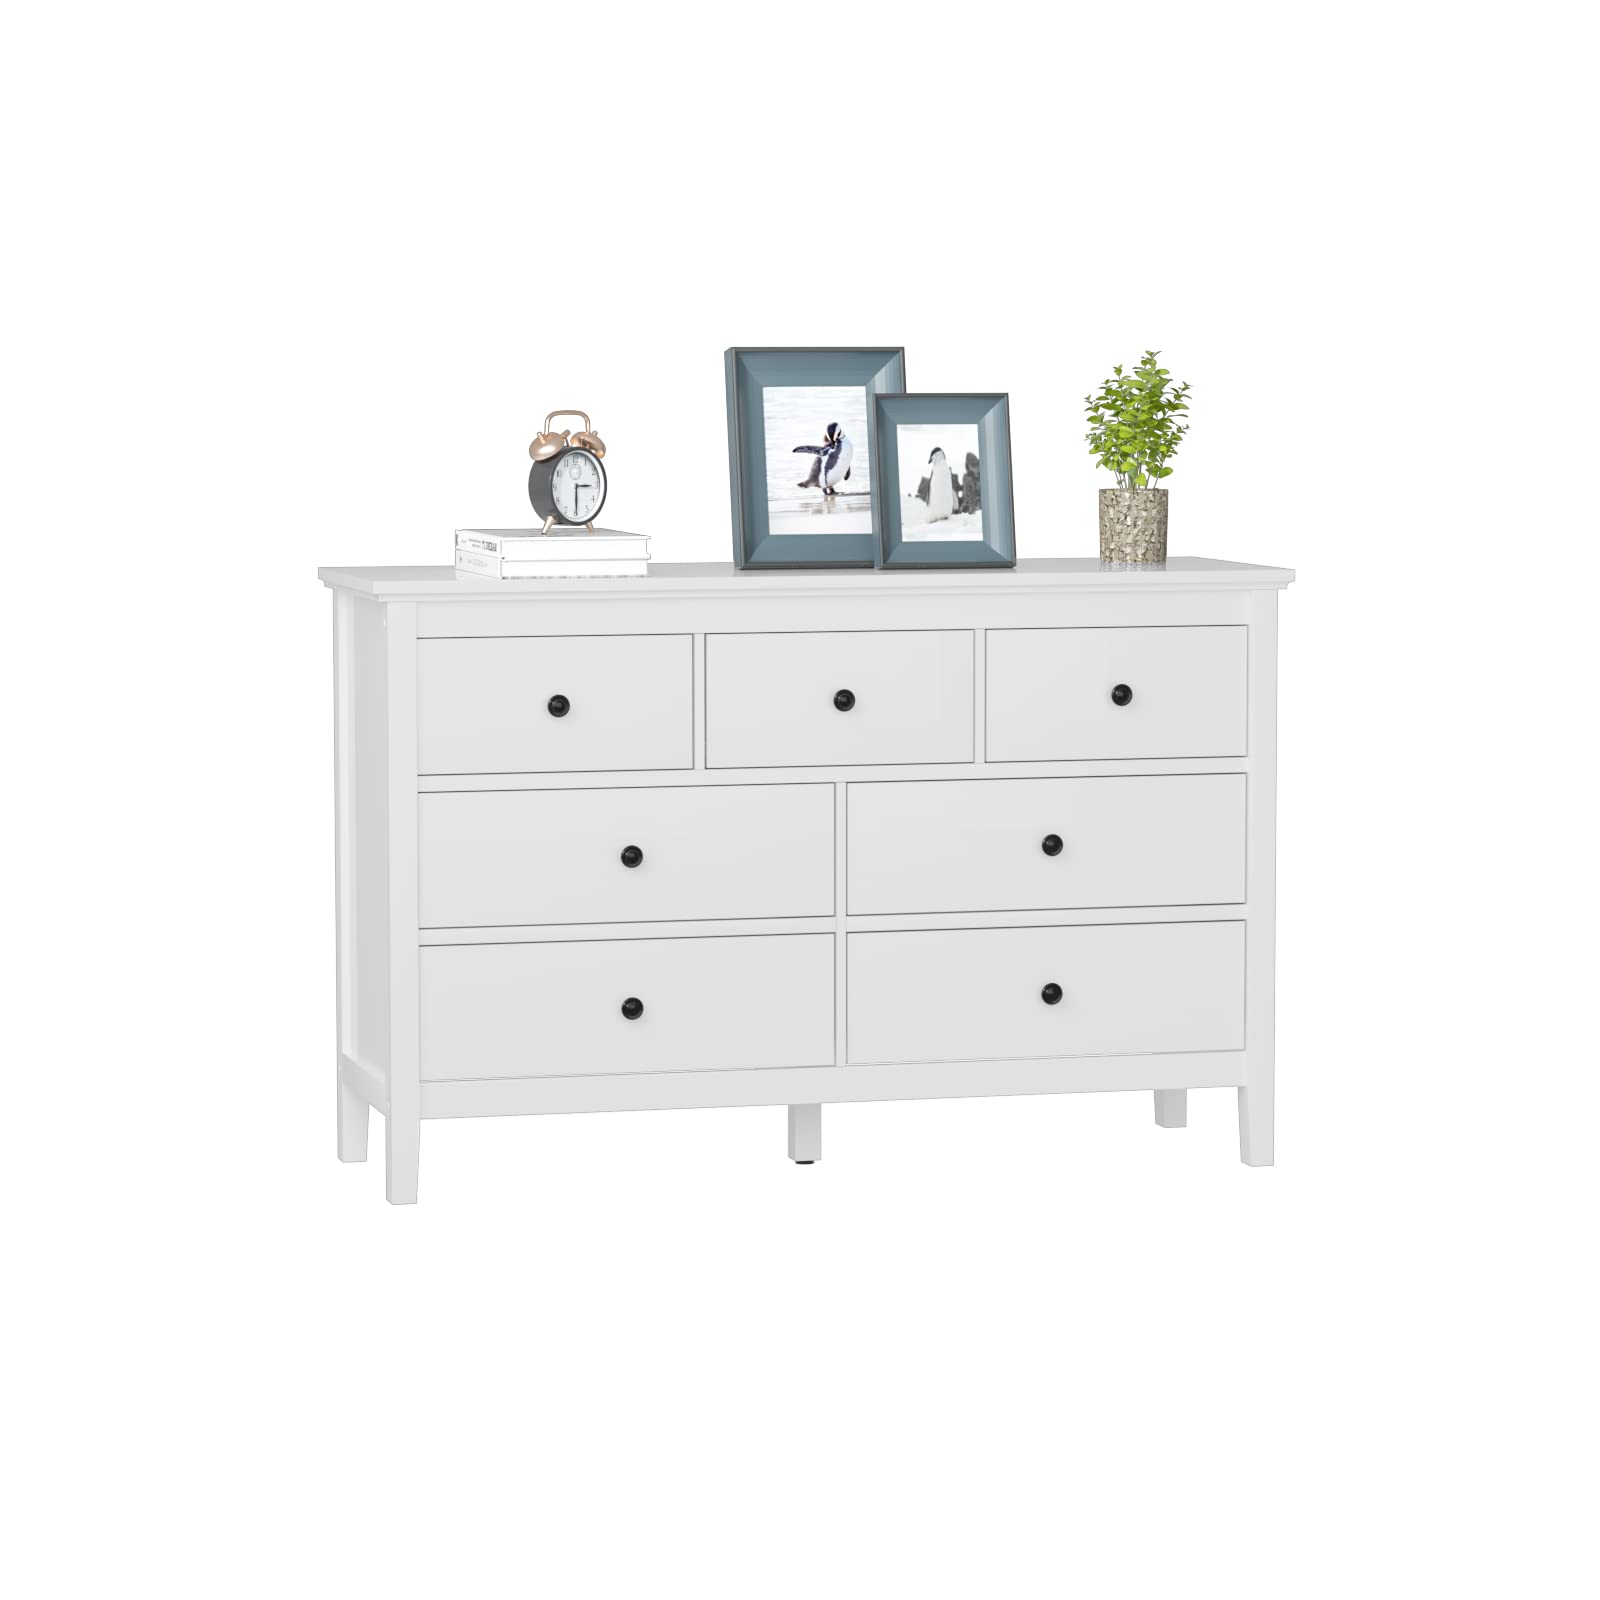 CARPETNAL White Modern Dresser for Bedroom, 7 Drawer Double Dresser with Wide Drawer and Metal Handles, Wood Dressers & Chests of Drawers for Hallway, Entryway.